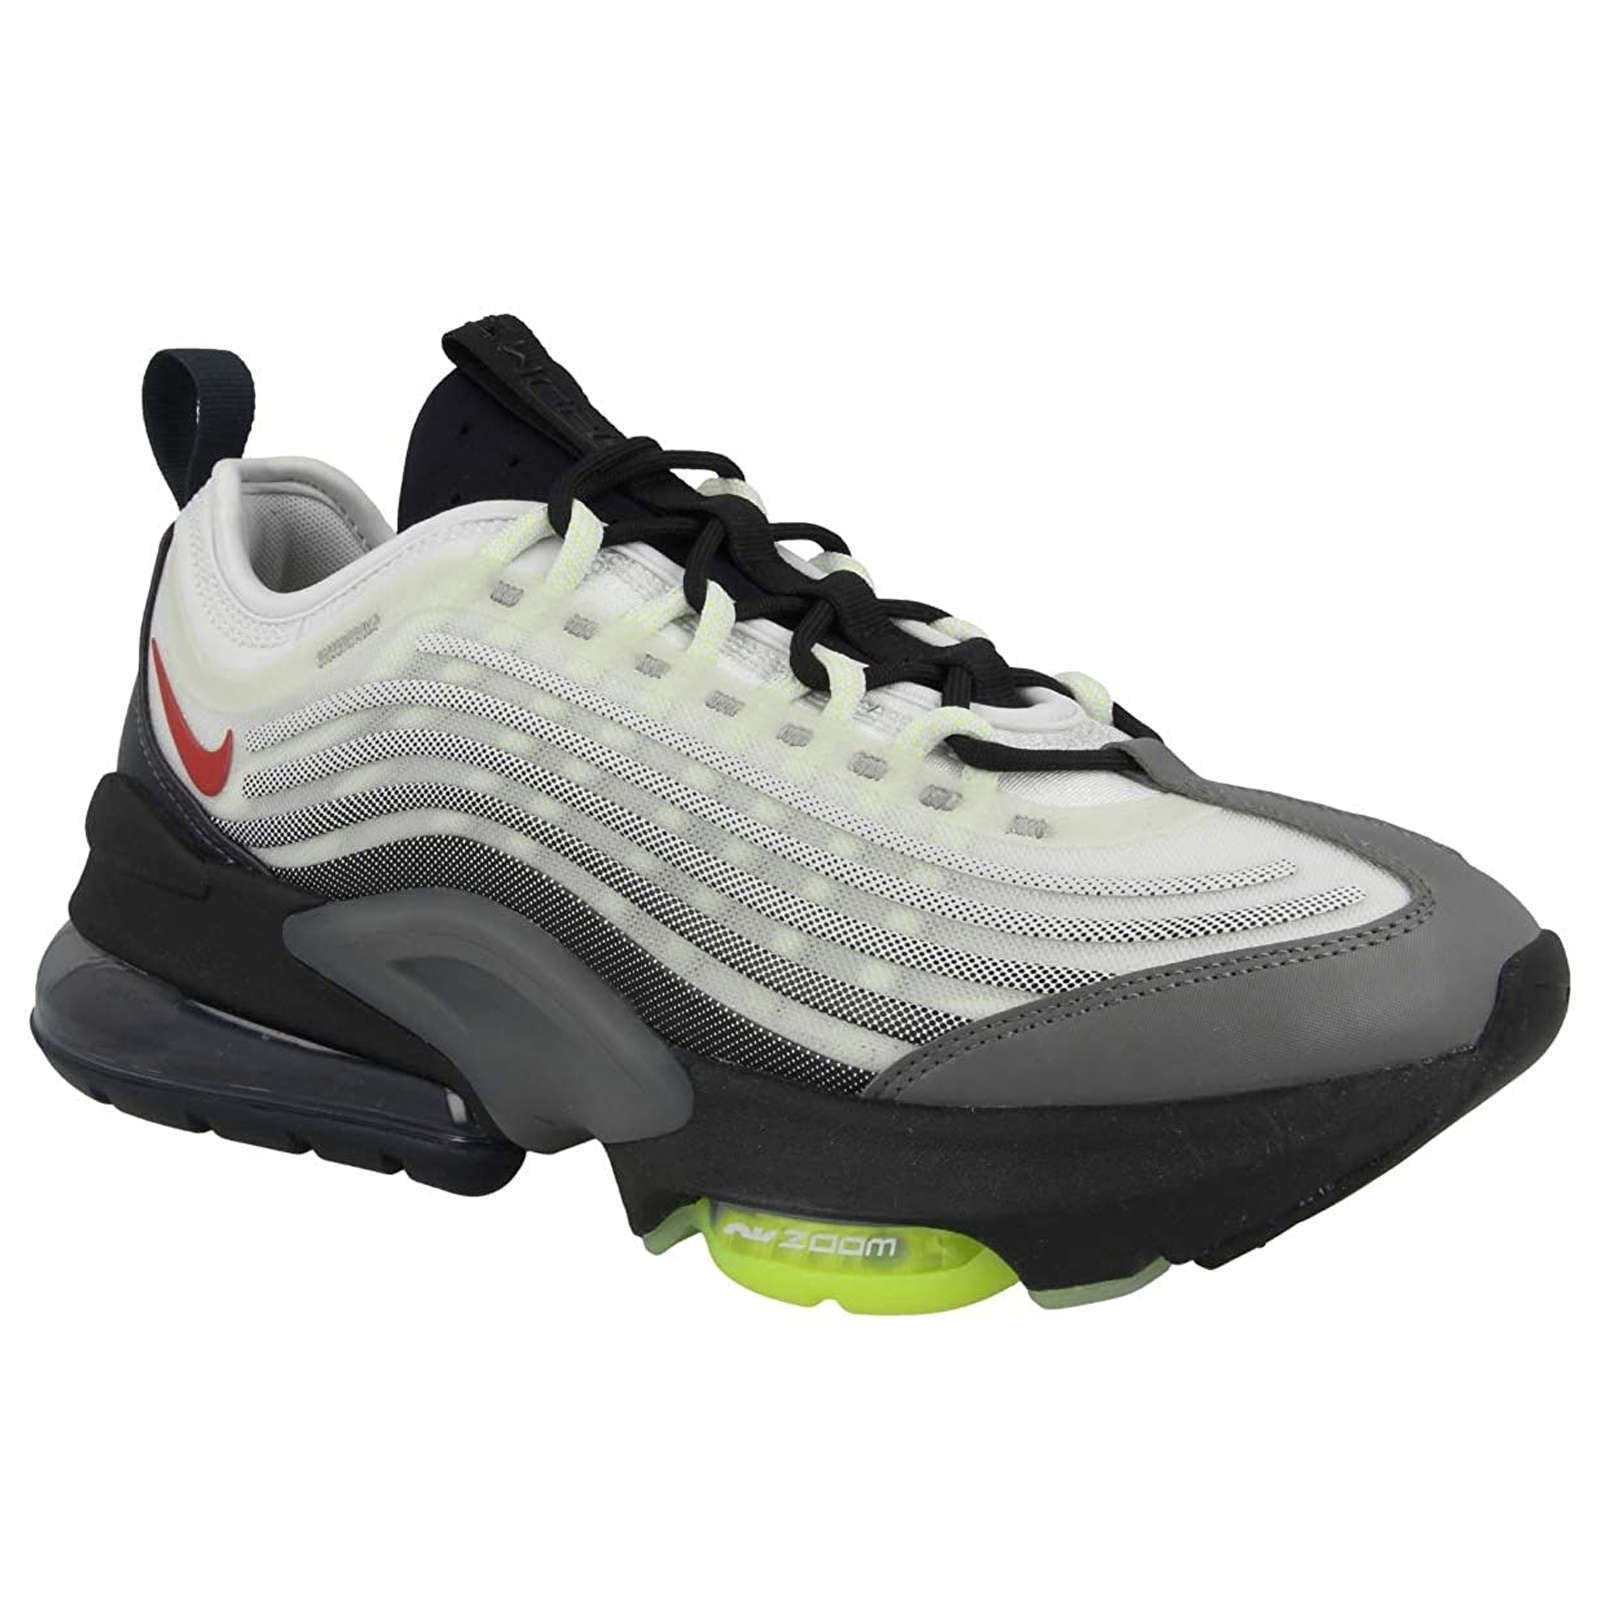 Nike Air Max ZM950 NRG Synthetic Textile Unisex Low-Top Trainers#color_black action red smoke grey